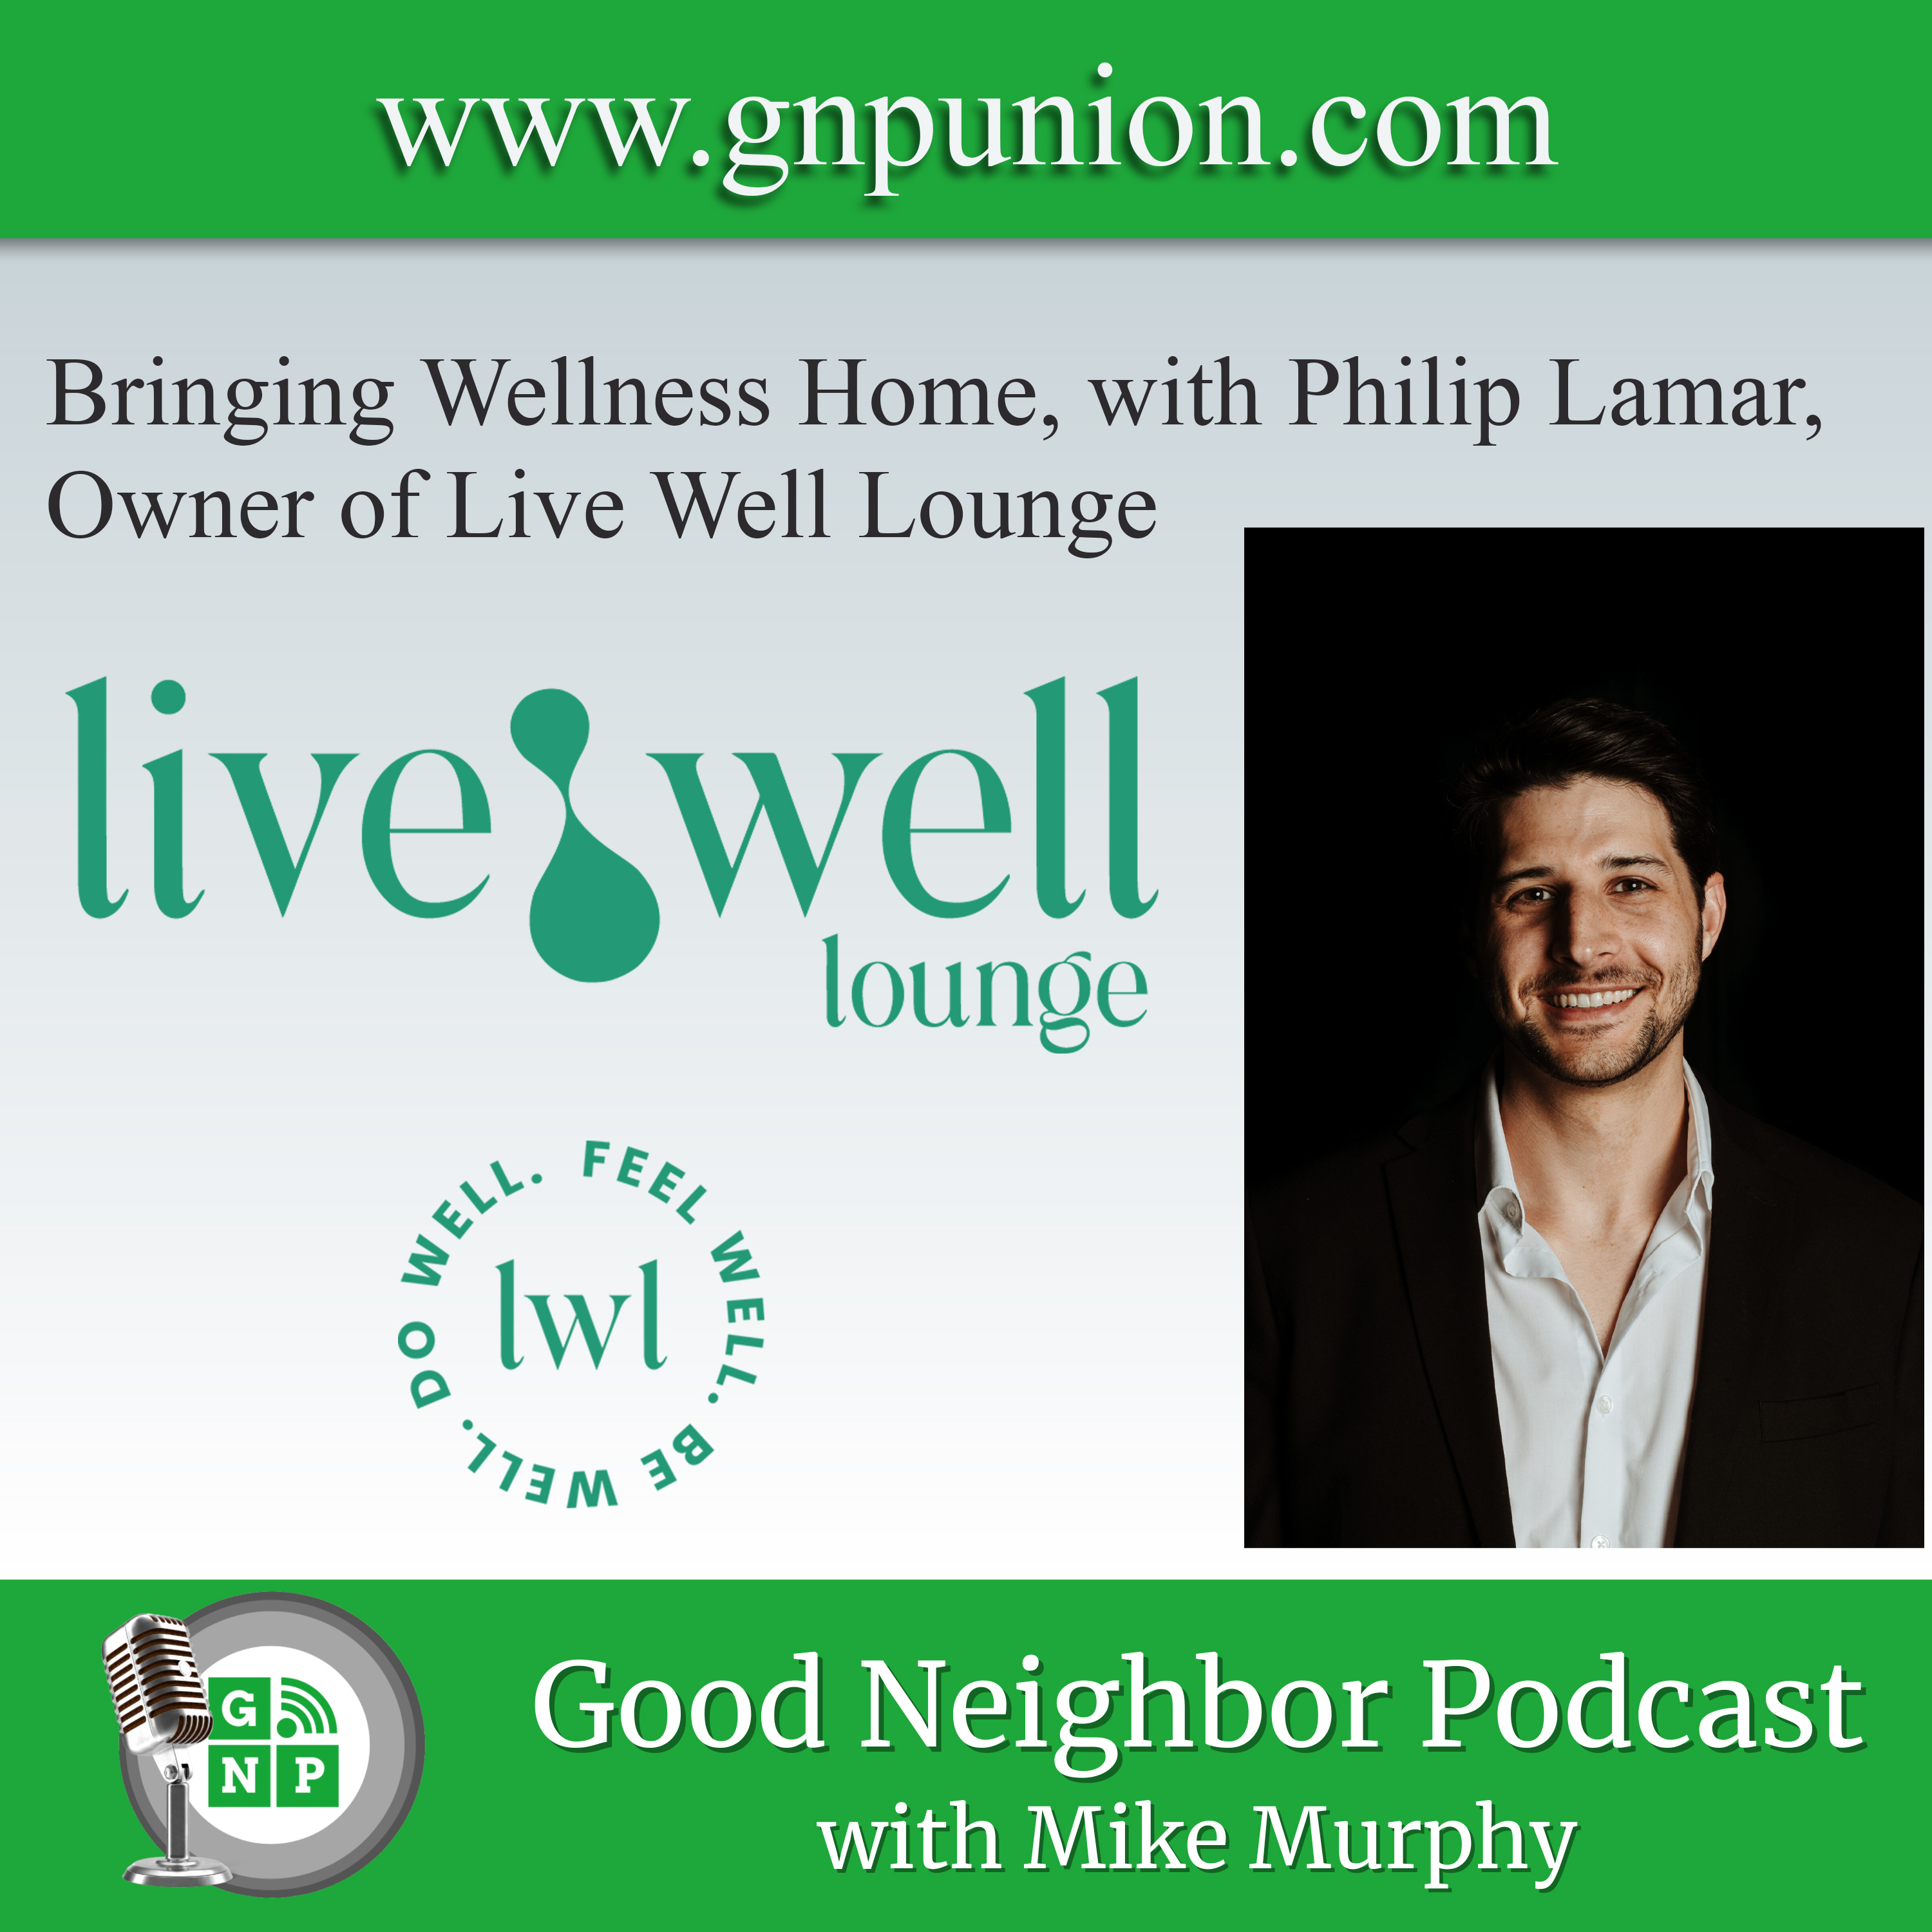 Bringing Wellness Home: Philip Lamar's Revolution in Health Care with Live Well Lounge